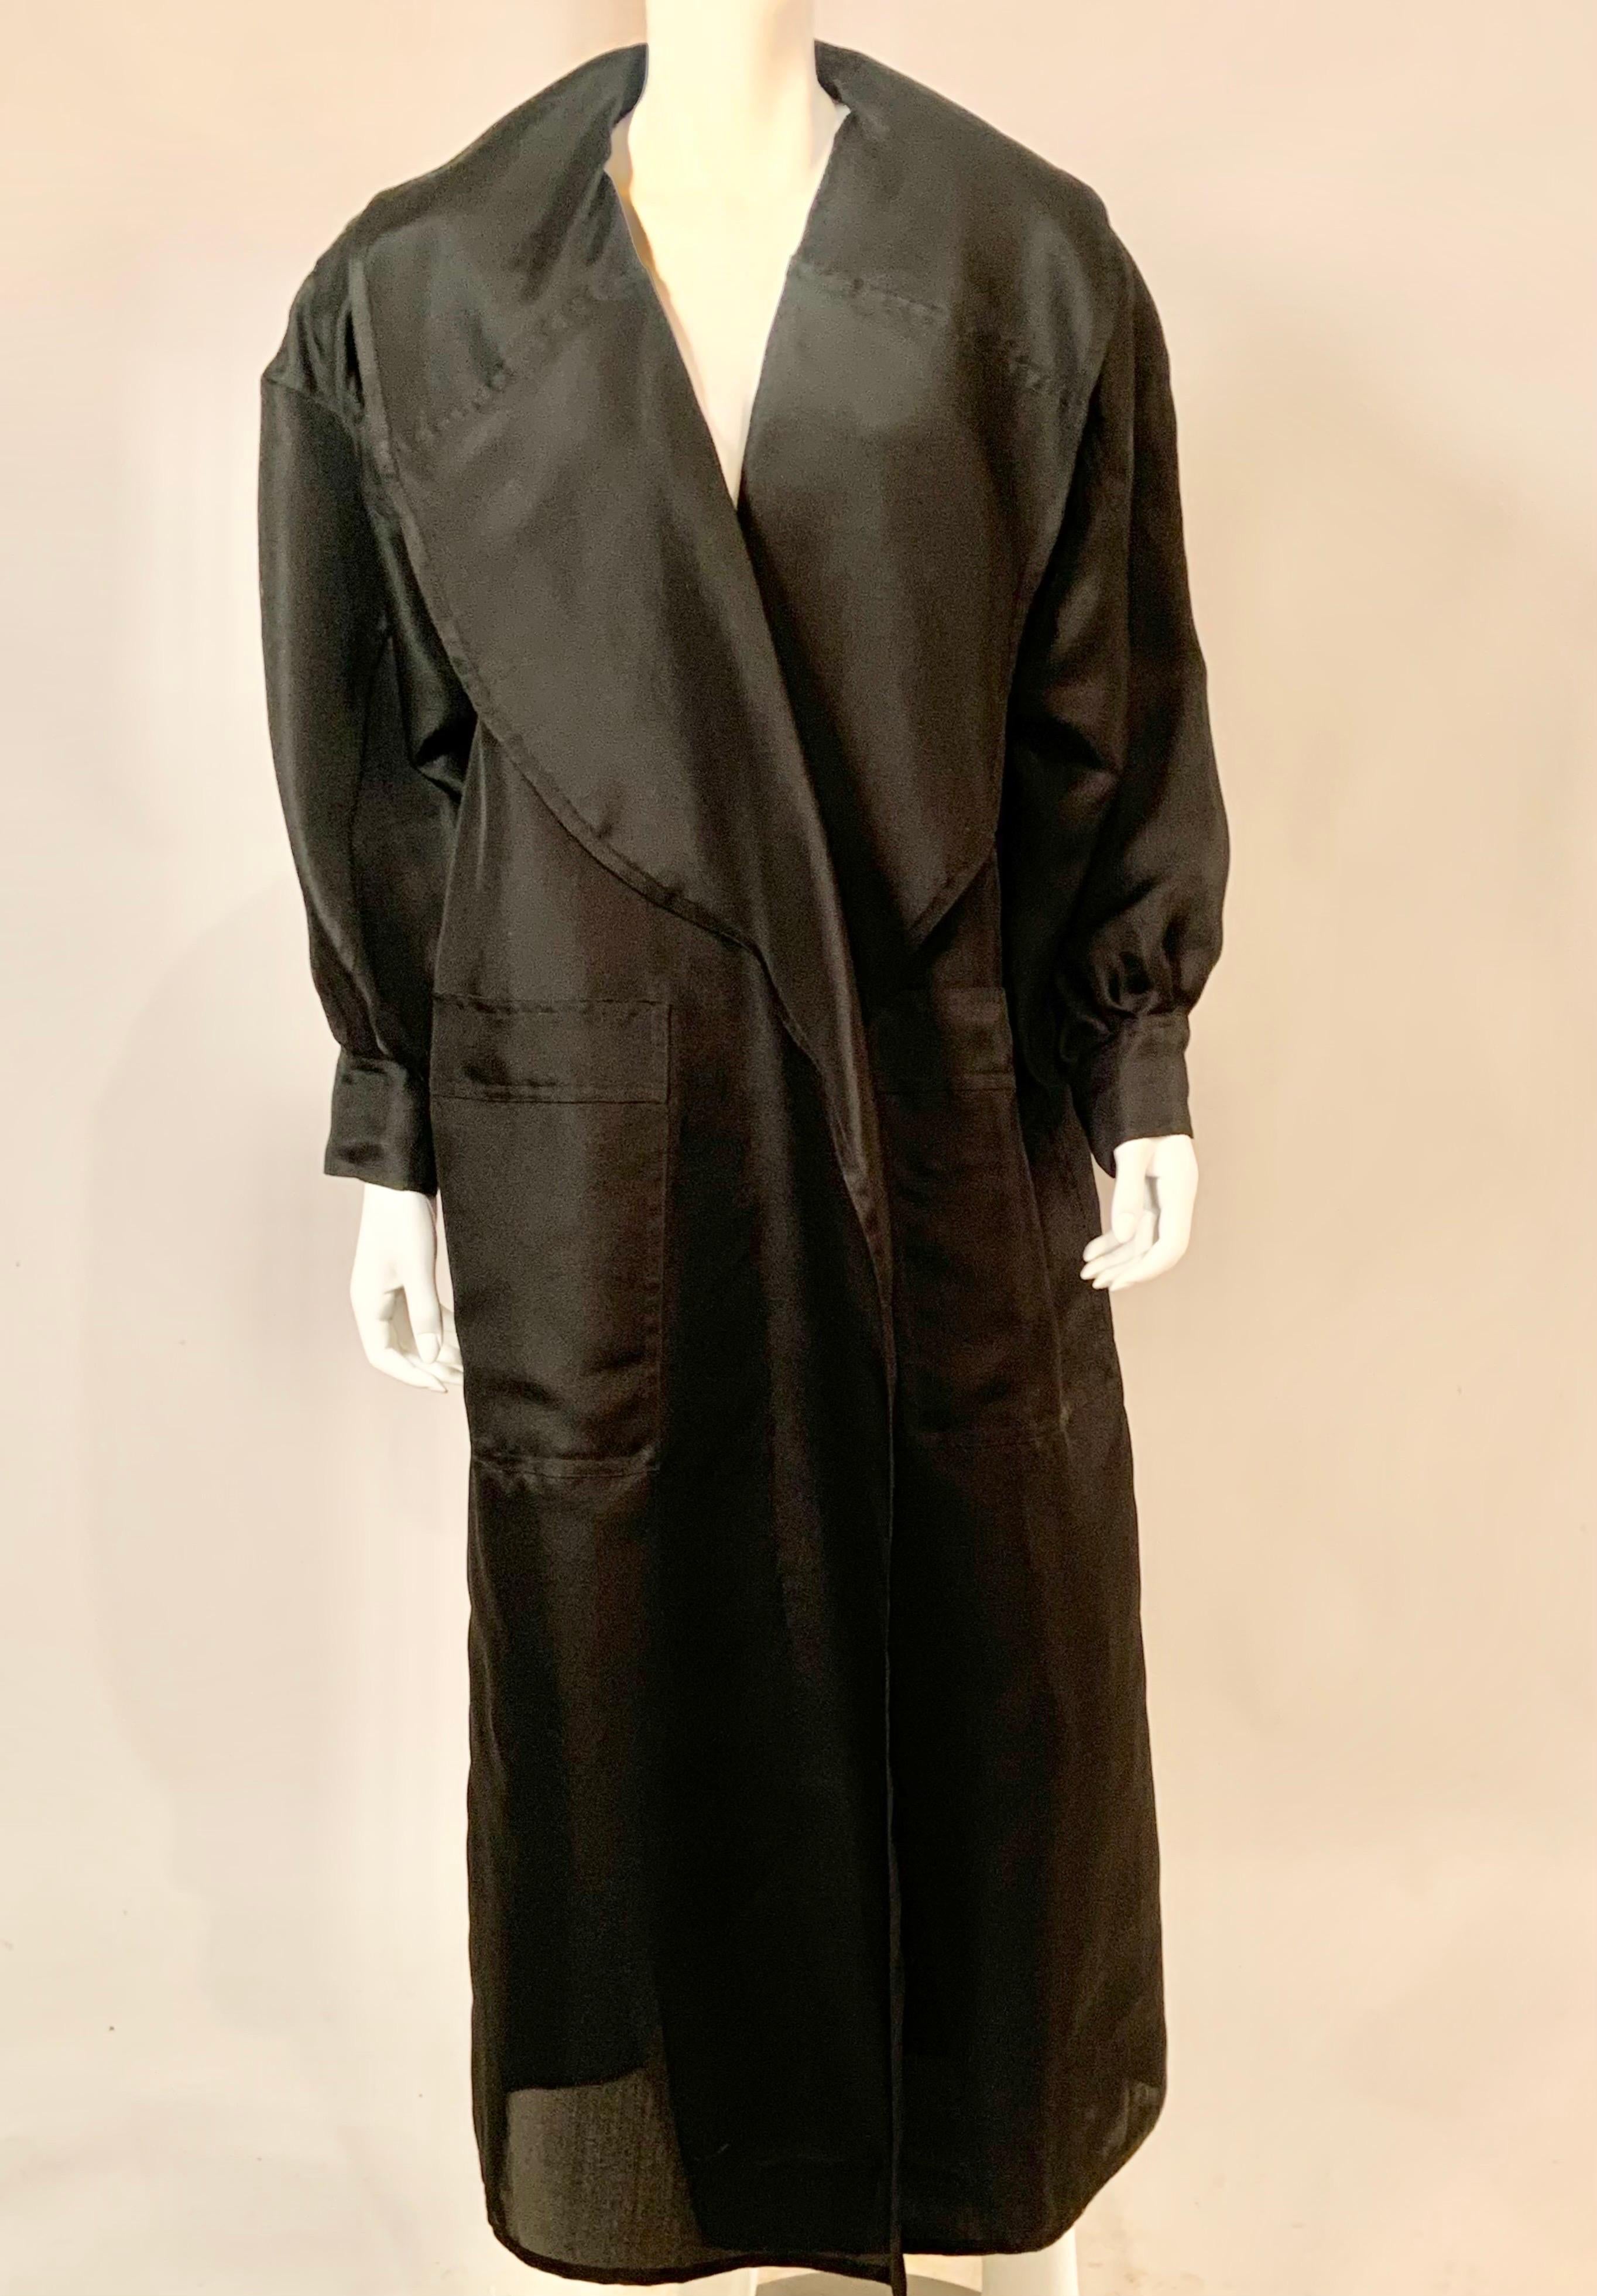 This voluminous sheer black silk duster coat from Salvatore Ferragamo is quite striking and definitely makes a statement.  The coat has oversized lapels, full sleeves with two button cuffs, one breast pocket and two extra large hip pockets.  There